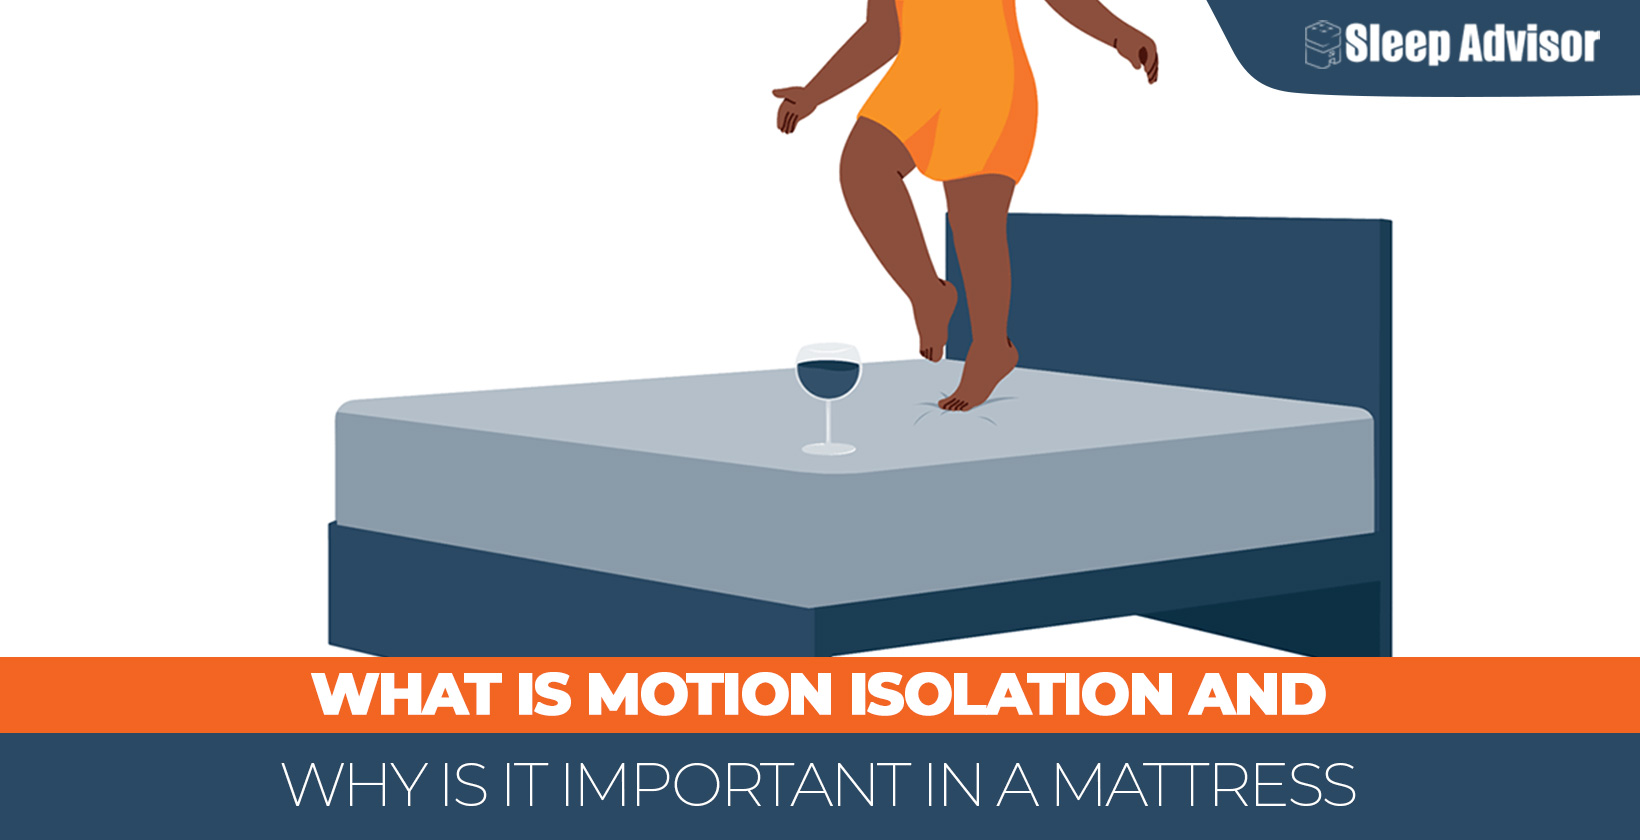 What is Motion Isolation and Why is it Important in a Mattress